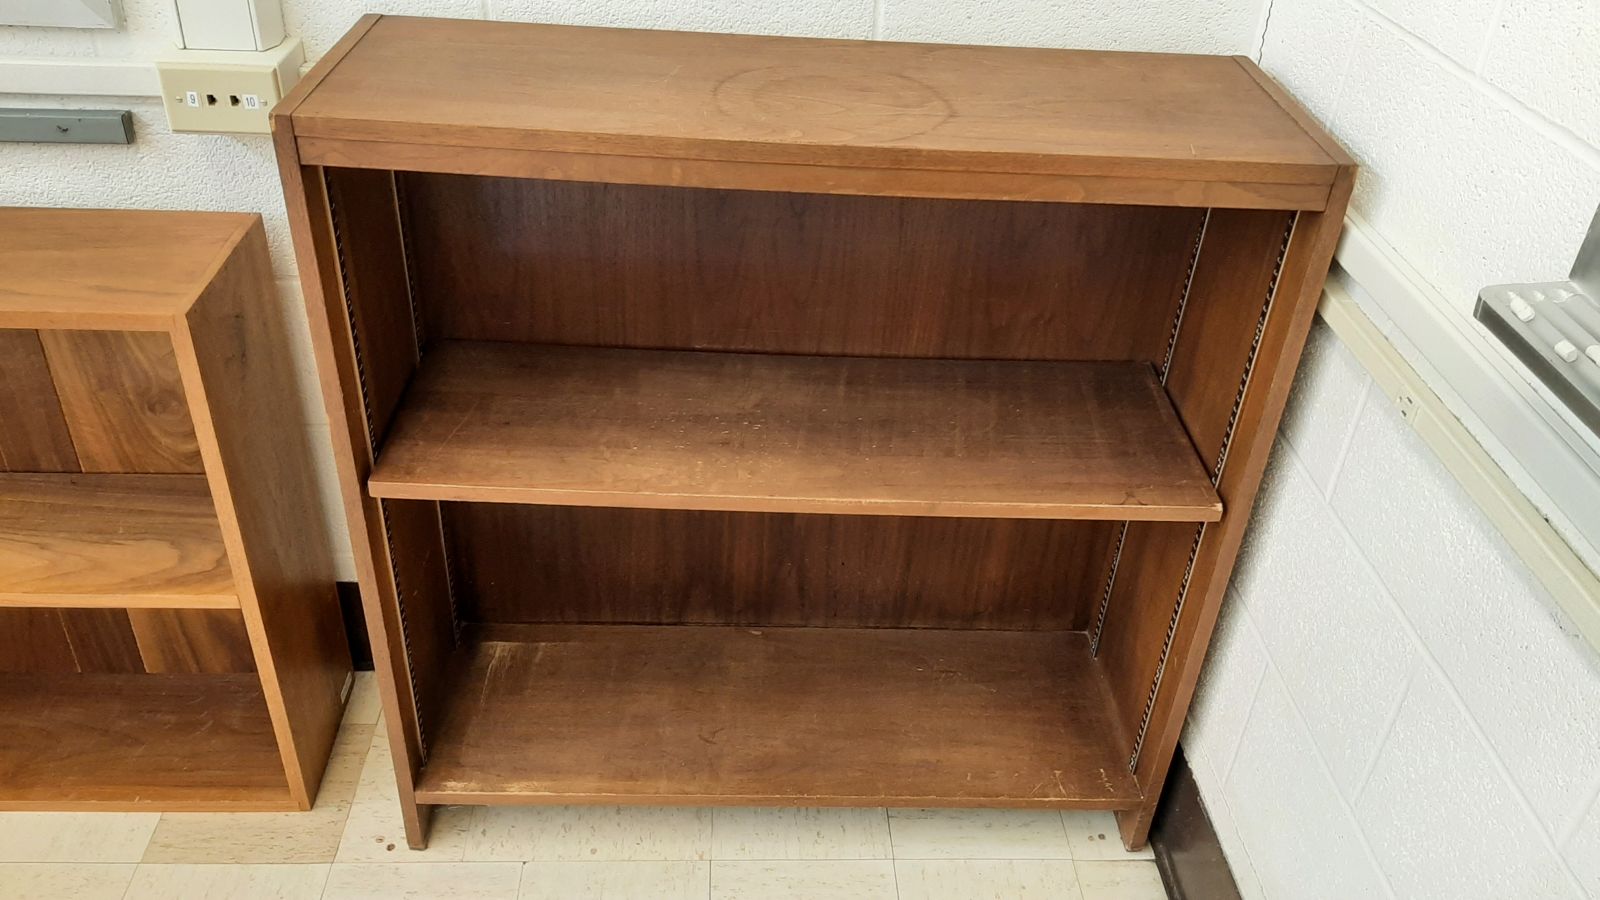 An image of a 2-shelf wood bookcase.